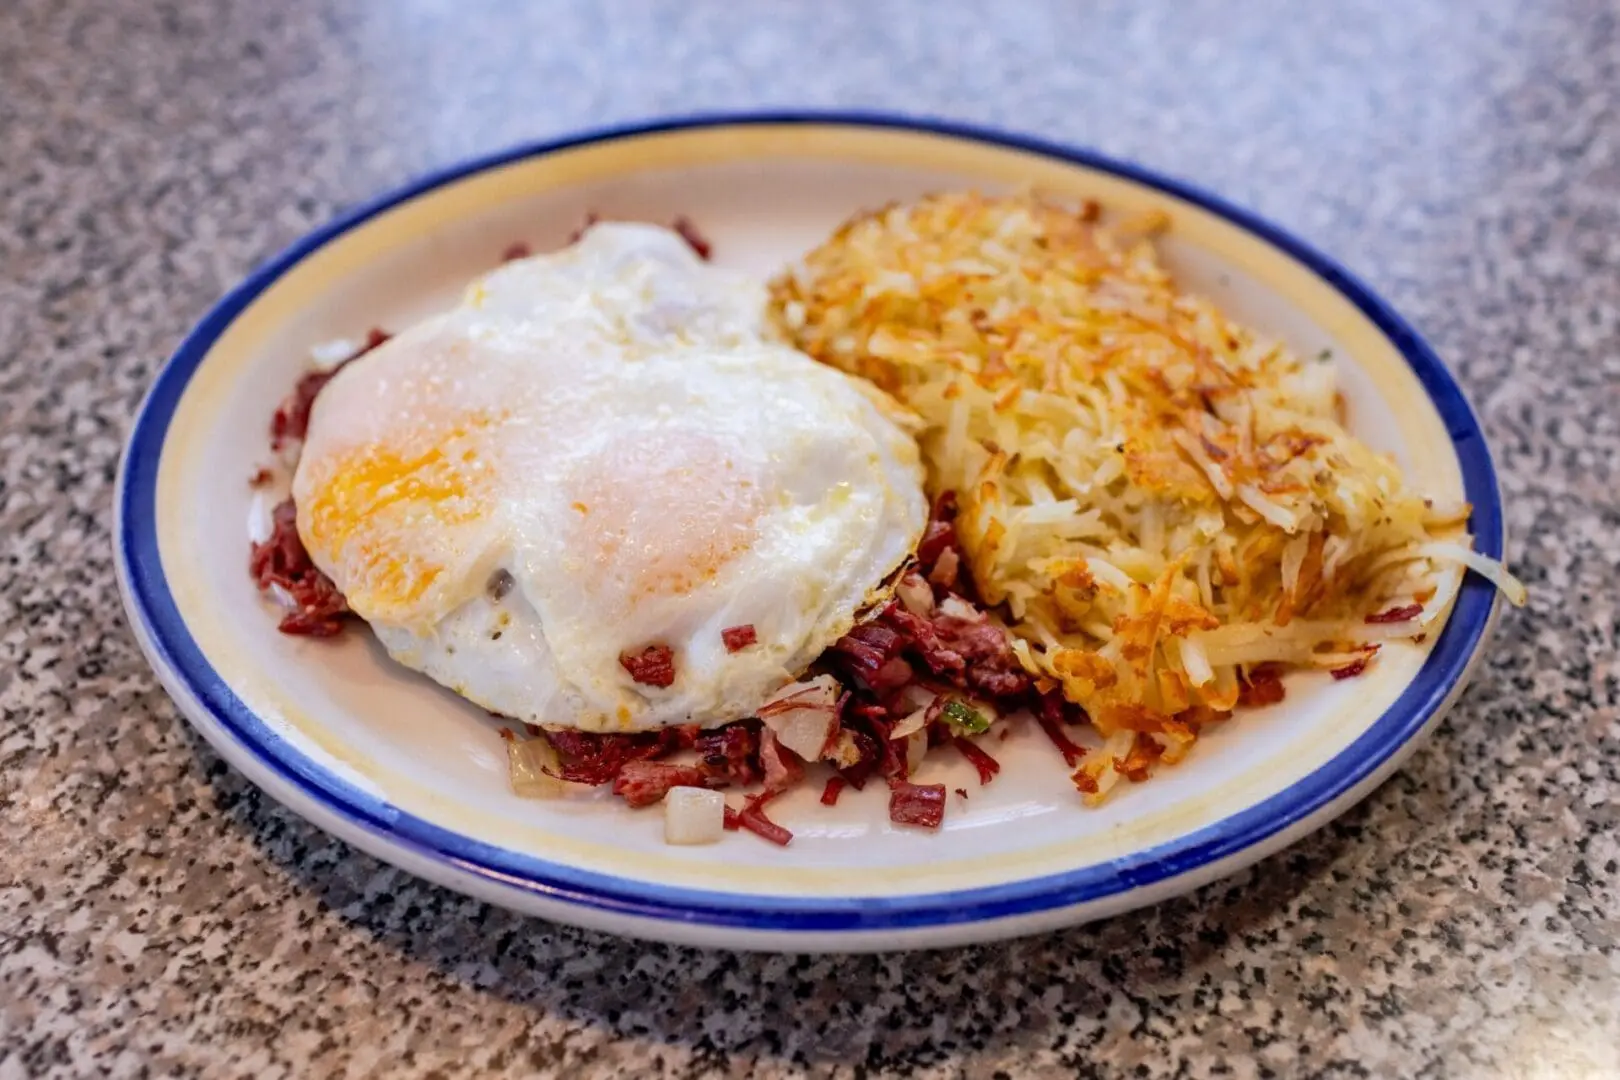 A plate of food with eggs and hash browns.